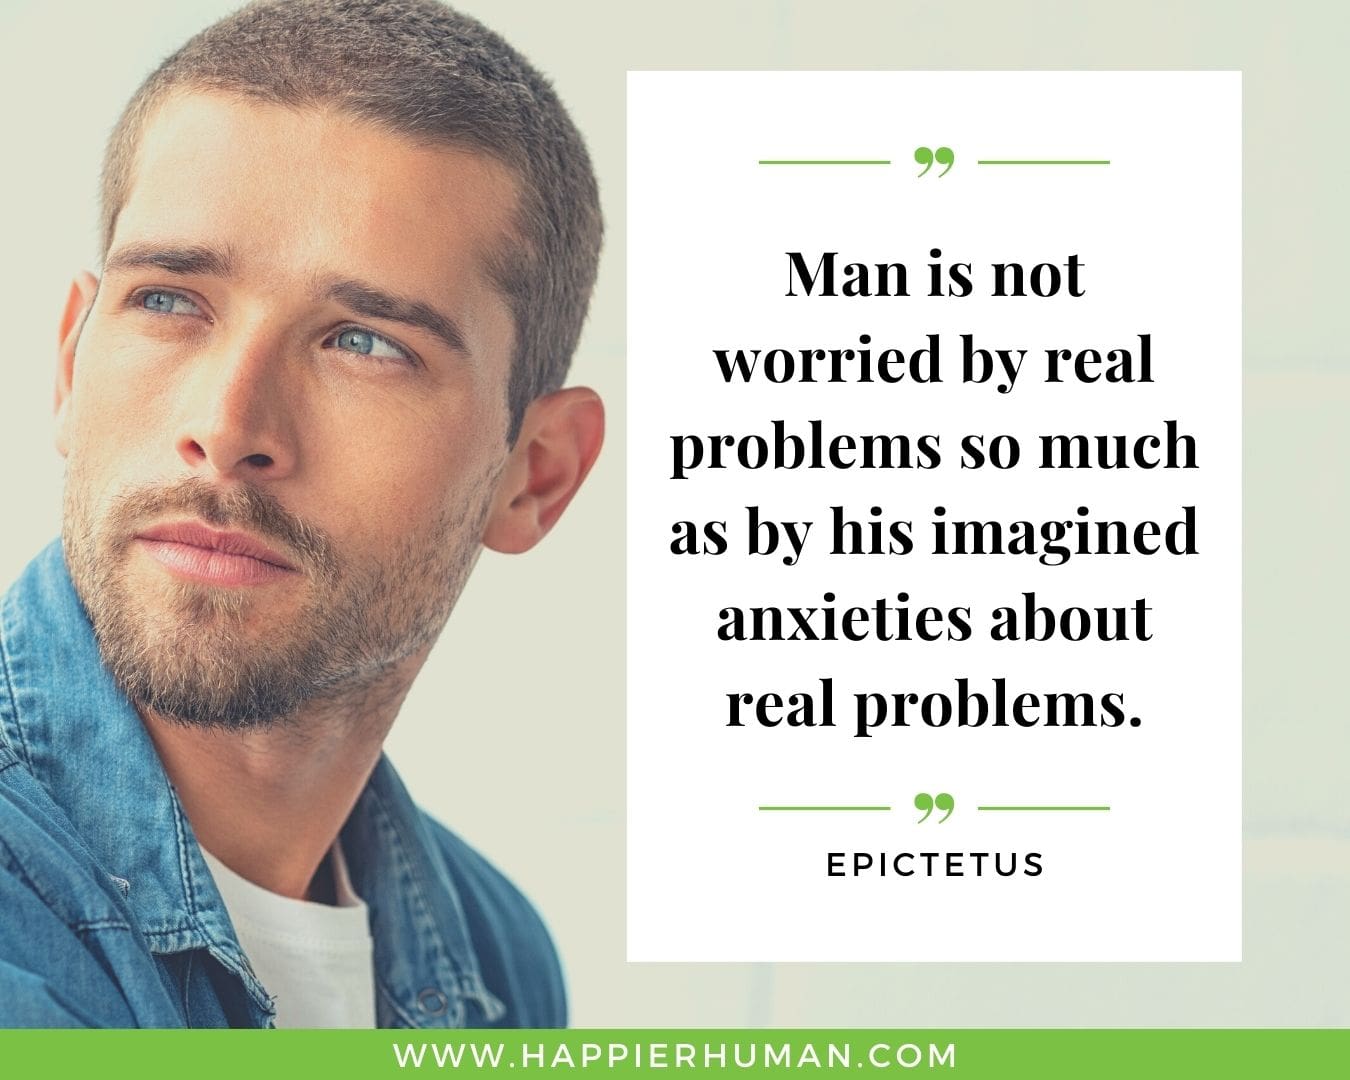 Overthinking Quotes - "Man is not worried by real problems so much as by his imagined anxieties about real problems." - Epictetus.